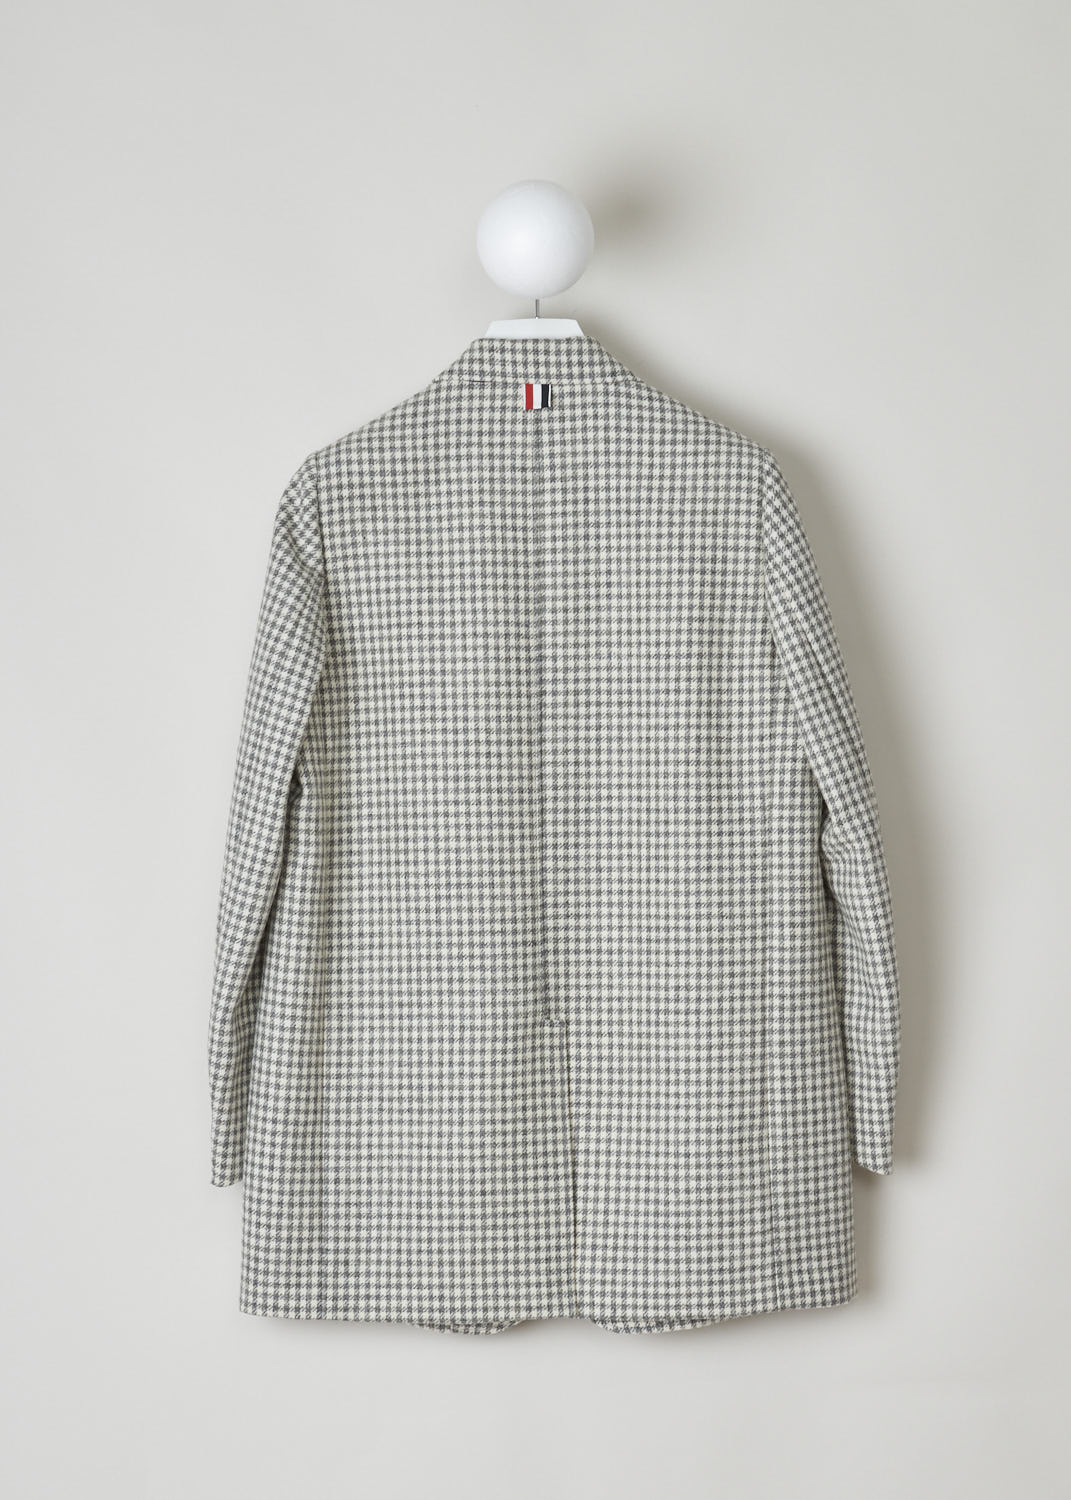 THOM BROWNE, OVERSIZED BLAZER IN HOUNDSTOOTH, FBC500A_06842_035_MED_GREY, Print, Back, Classic Houndstooth printed oversized blazer. This single breasted blazer features a notched lapel and a front button closure. The blazer has a single chest pocket, two patch pockets and three inner pockets. The long sleeves have buttoned cuffs. In the back, a centre slit can be found. 
